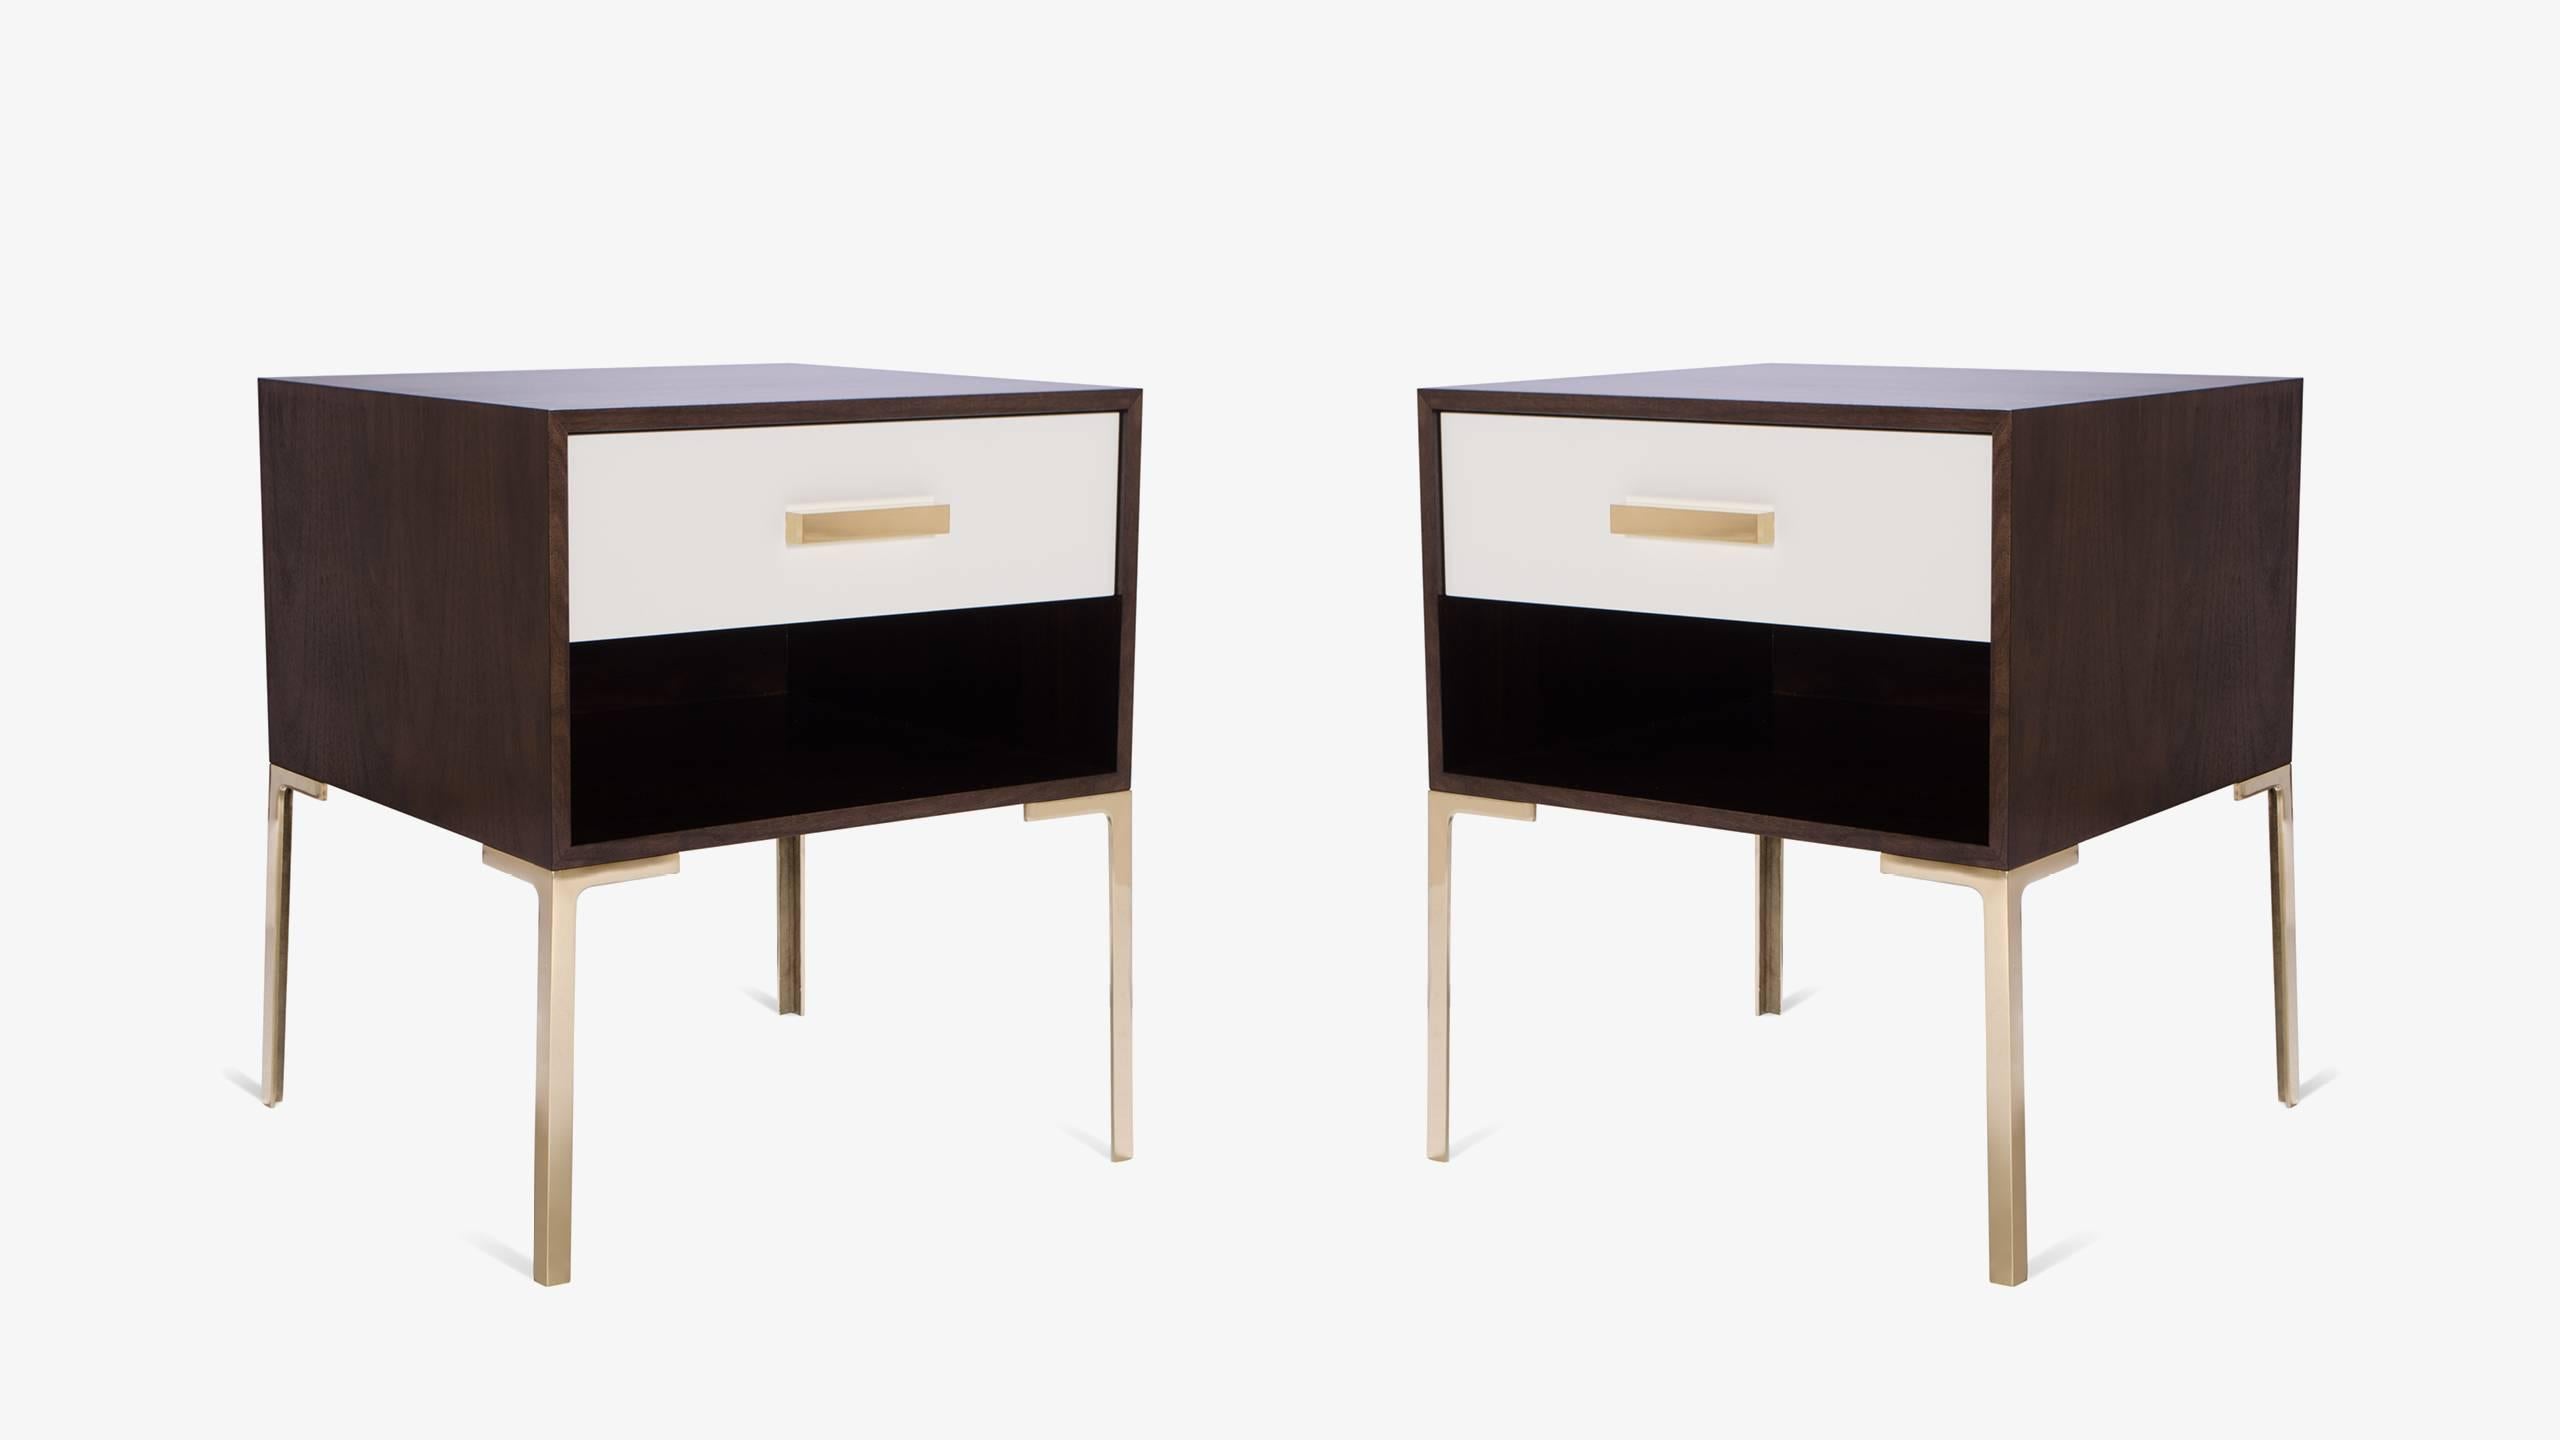 The Astor tall nightstand, a new iteration designed with one drawer and an open storage space below. Astor was designed with the delicate proportions of the mid-century, celebrating an era of design that remains ever so popular today.

The Astor